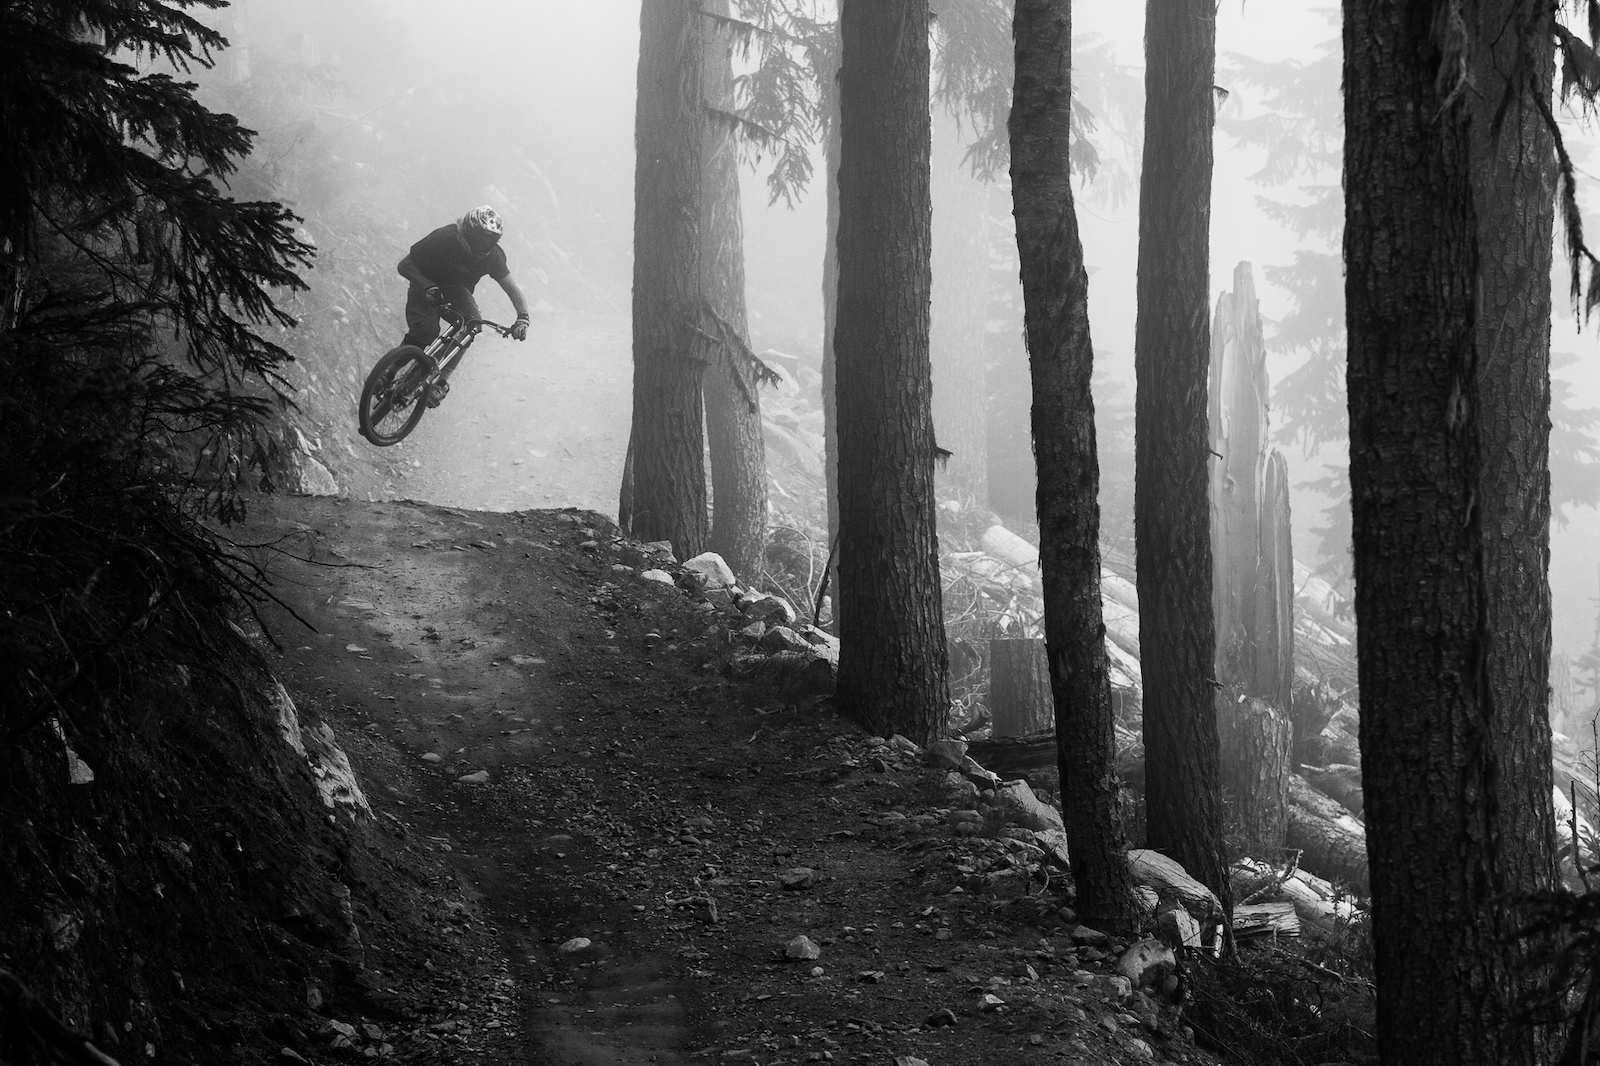 Kelly McGarry tables his mountain bike on Freight Train a trail in Whistler Bike Park Whistler BC Photo Dan Barham